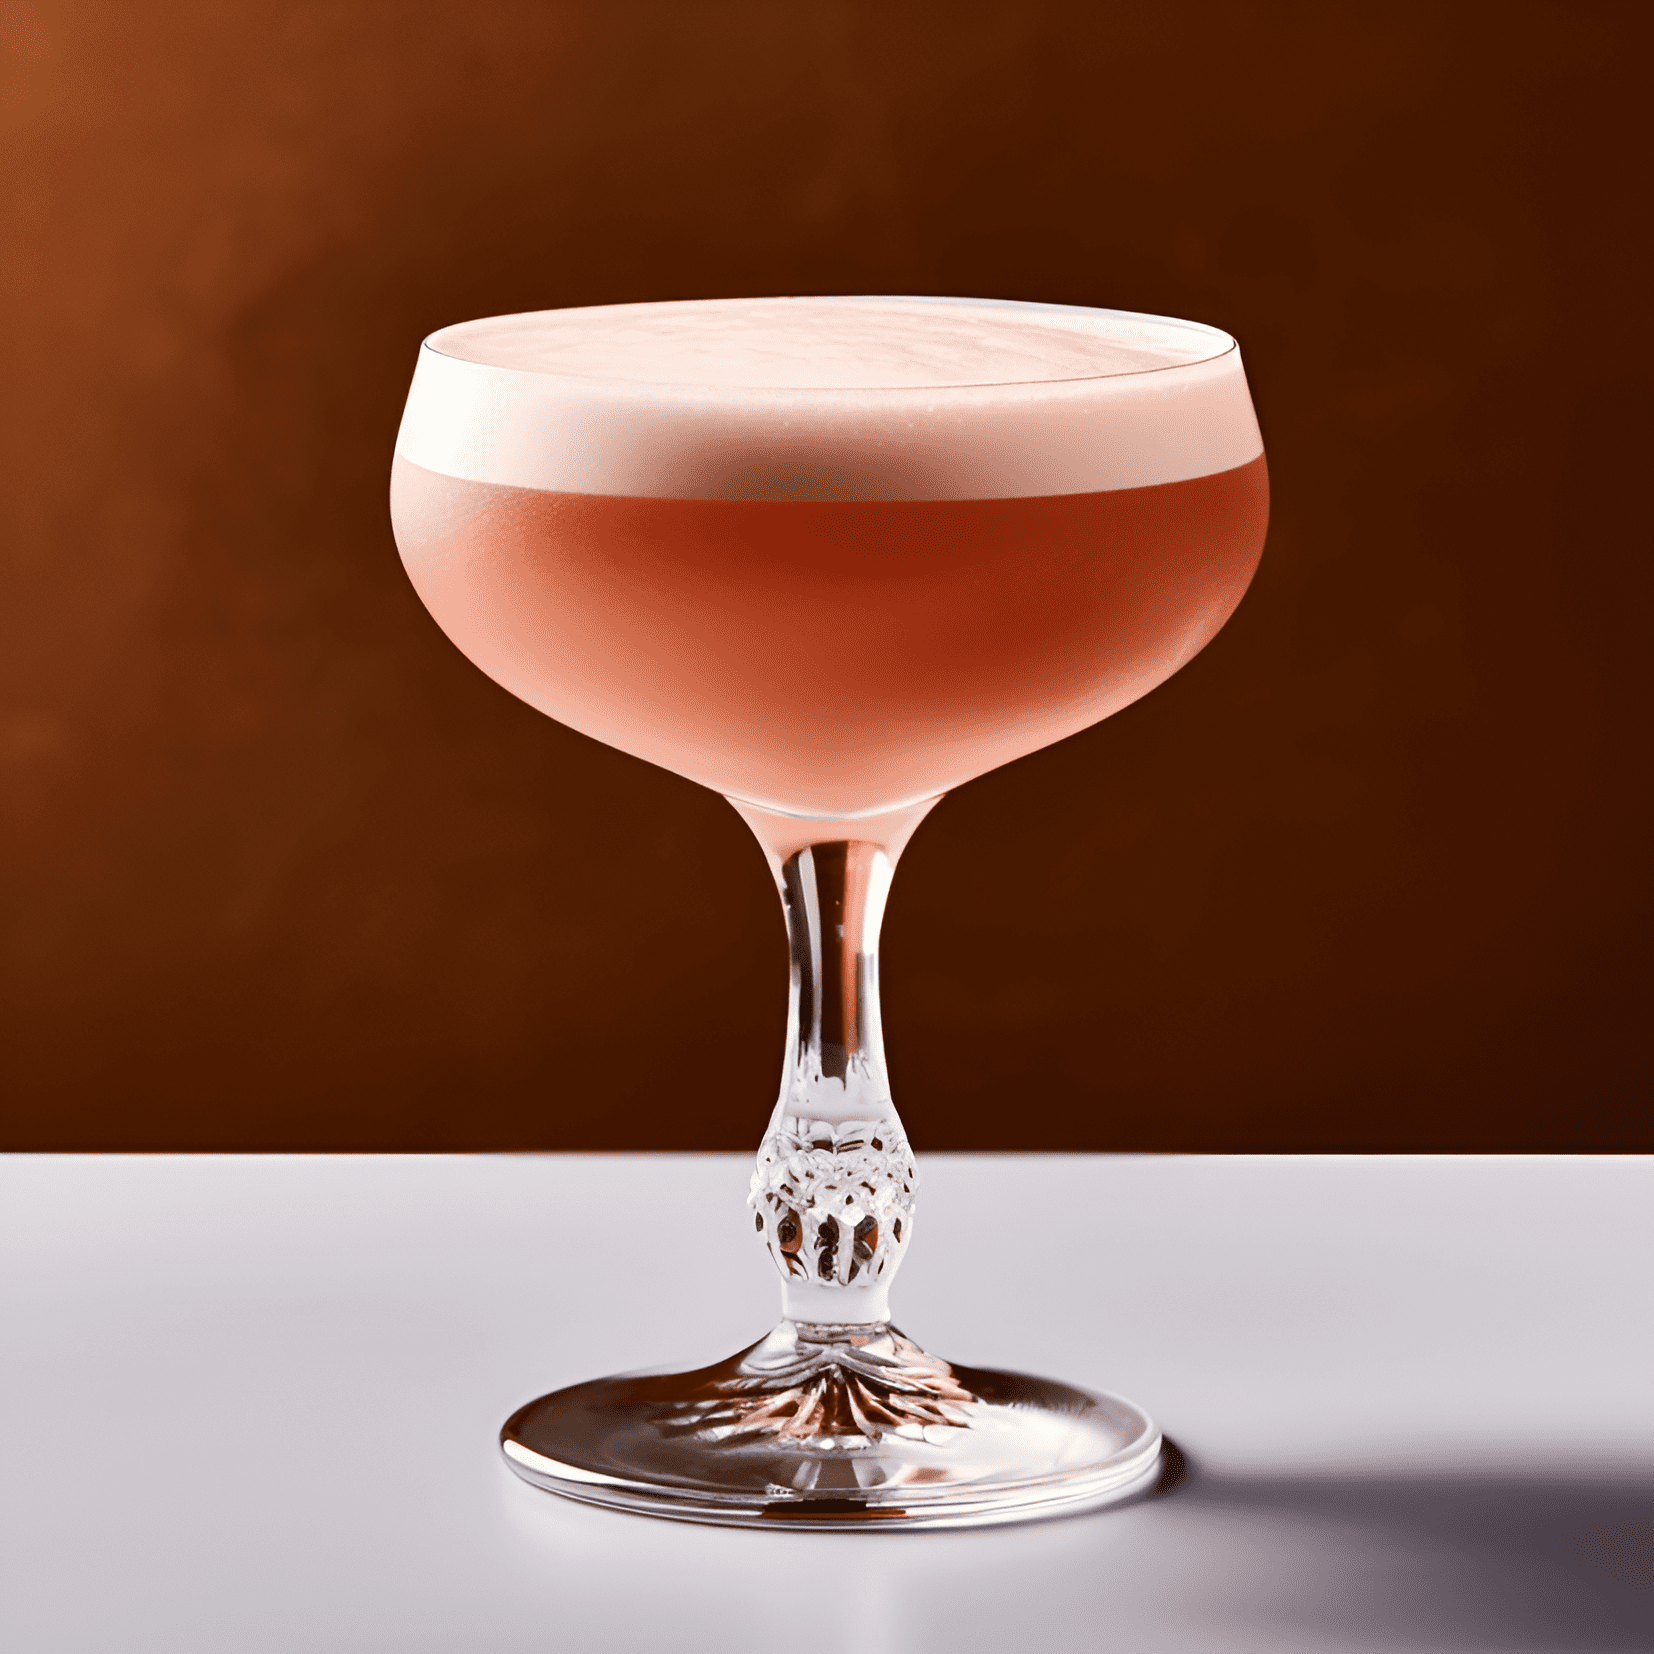 Dusty Rose Cocktail Recipe - The Dusty Rose is a delicate and well-balanced cocktail with a subtle sweetness, floral notes, and a hint of tartness. It has a smooth, velvety texture and a refreshing, light finish.